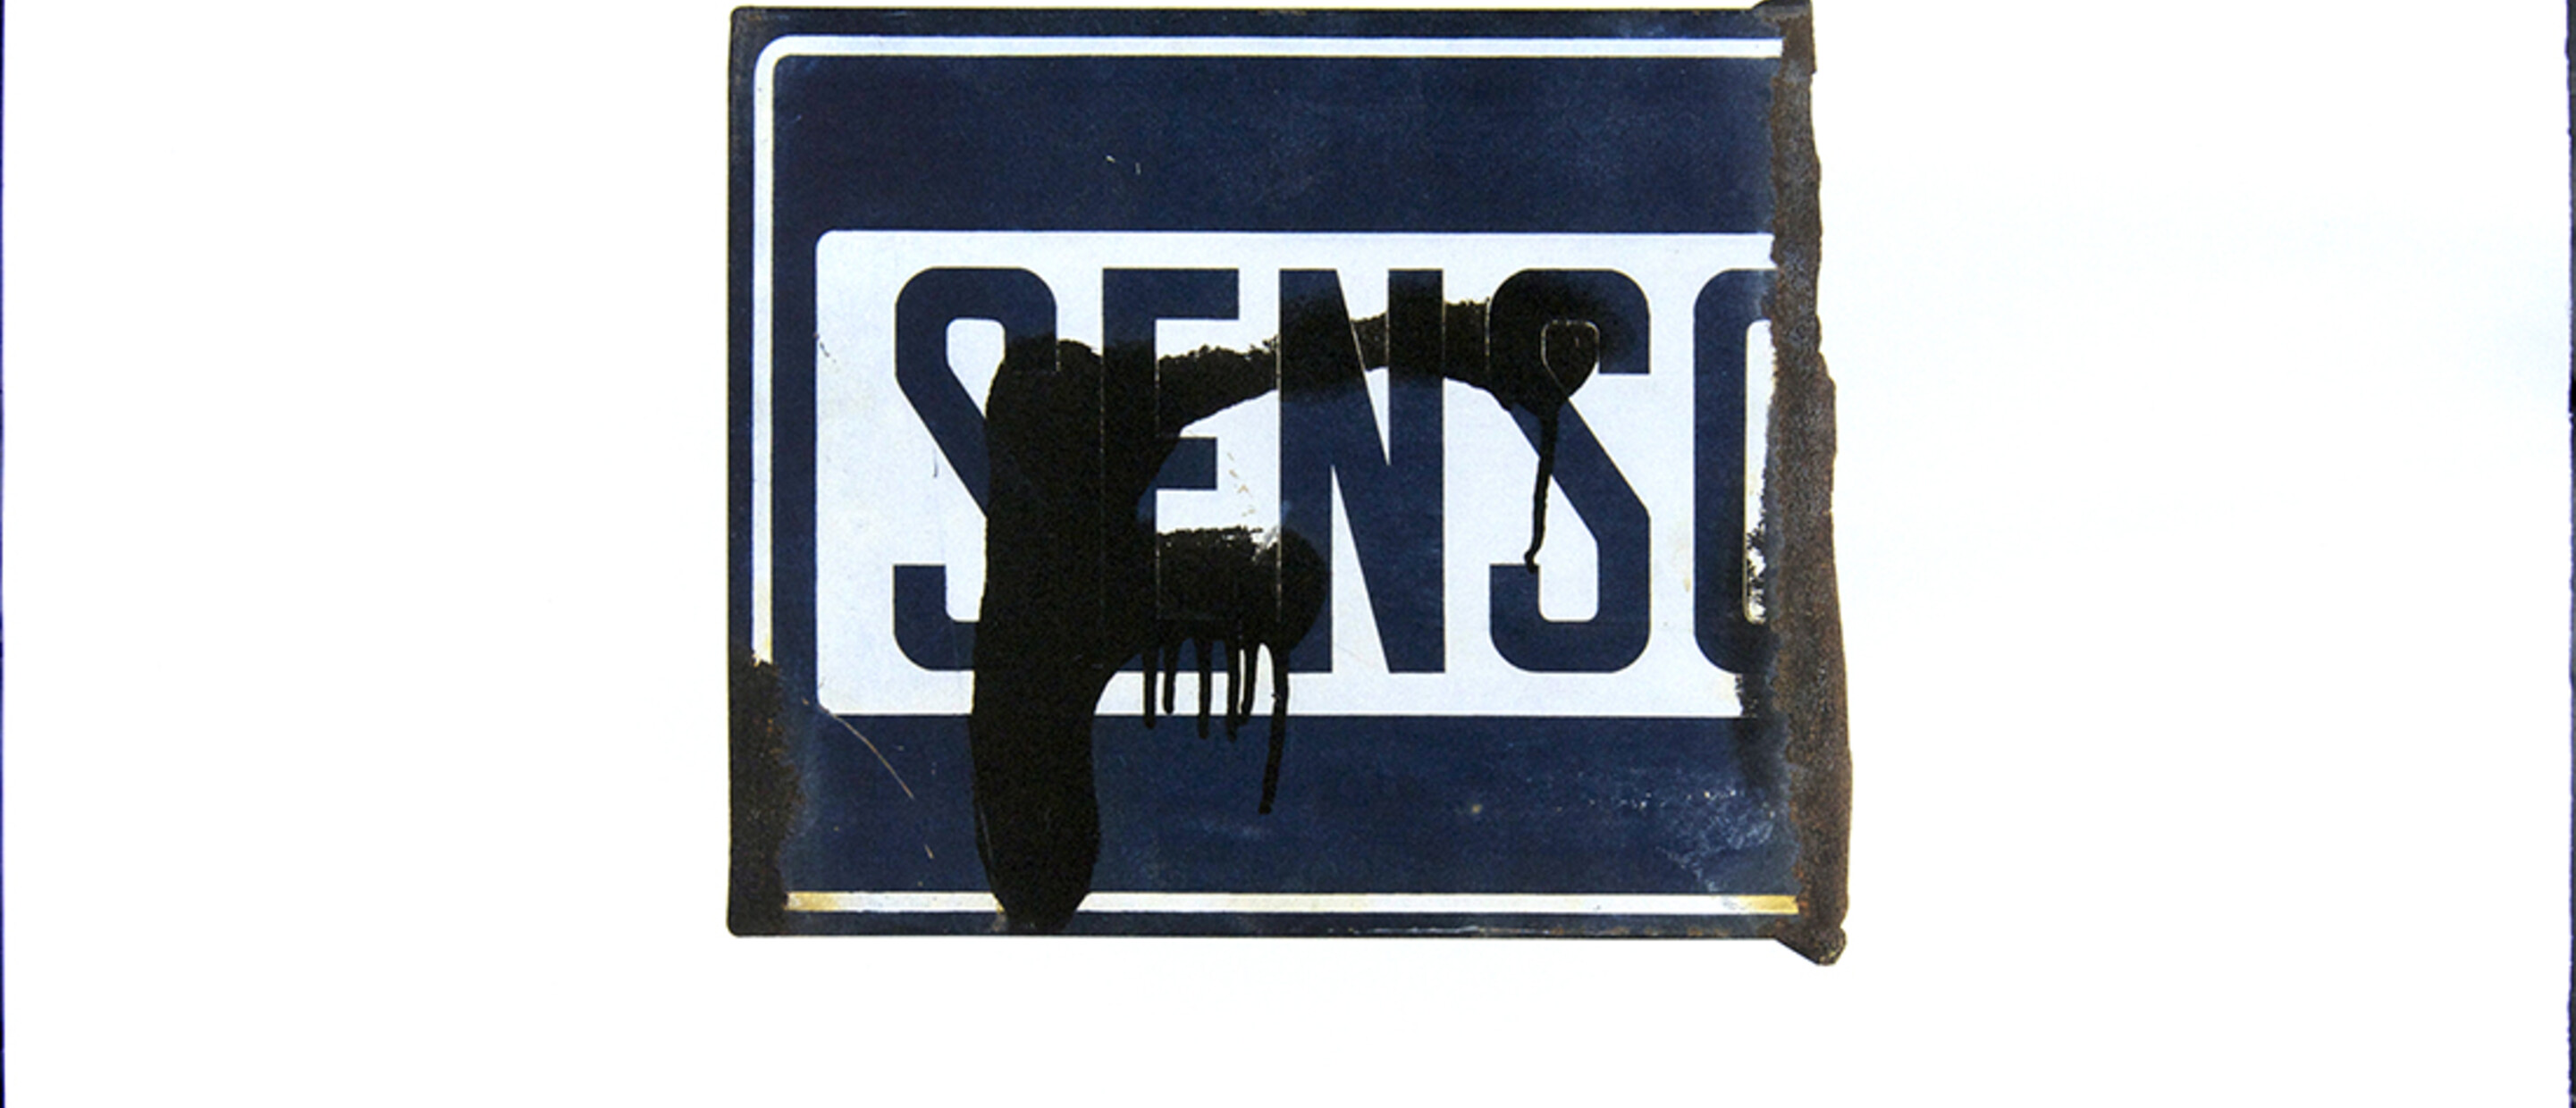 Perdita di senso (Loss of Sense), 1997, offset lithography on paper, 19 ¾ x 27 3/8 in. (50.17 x 69.53 cm.) senso unico = one way (street sign). Pomona College Collection. Gift of the artist.   